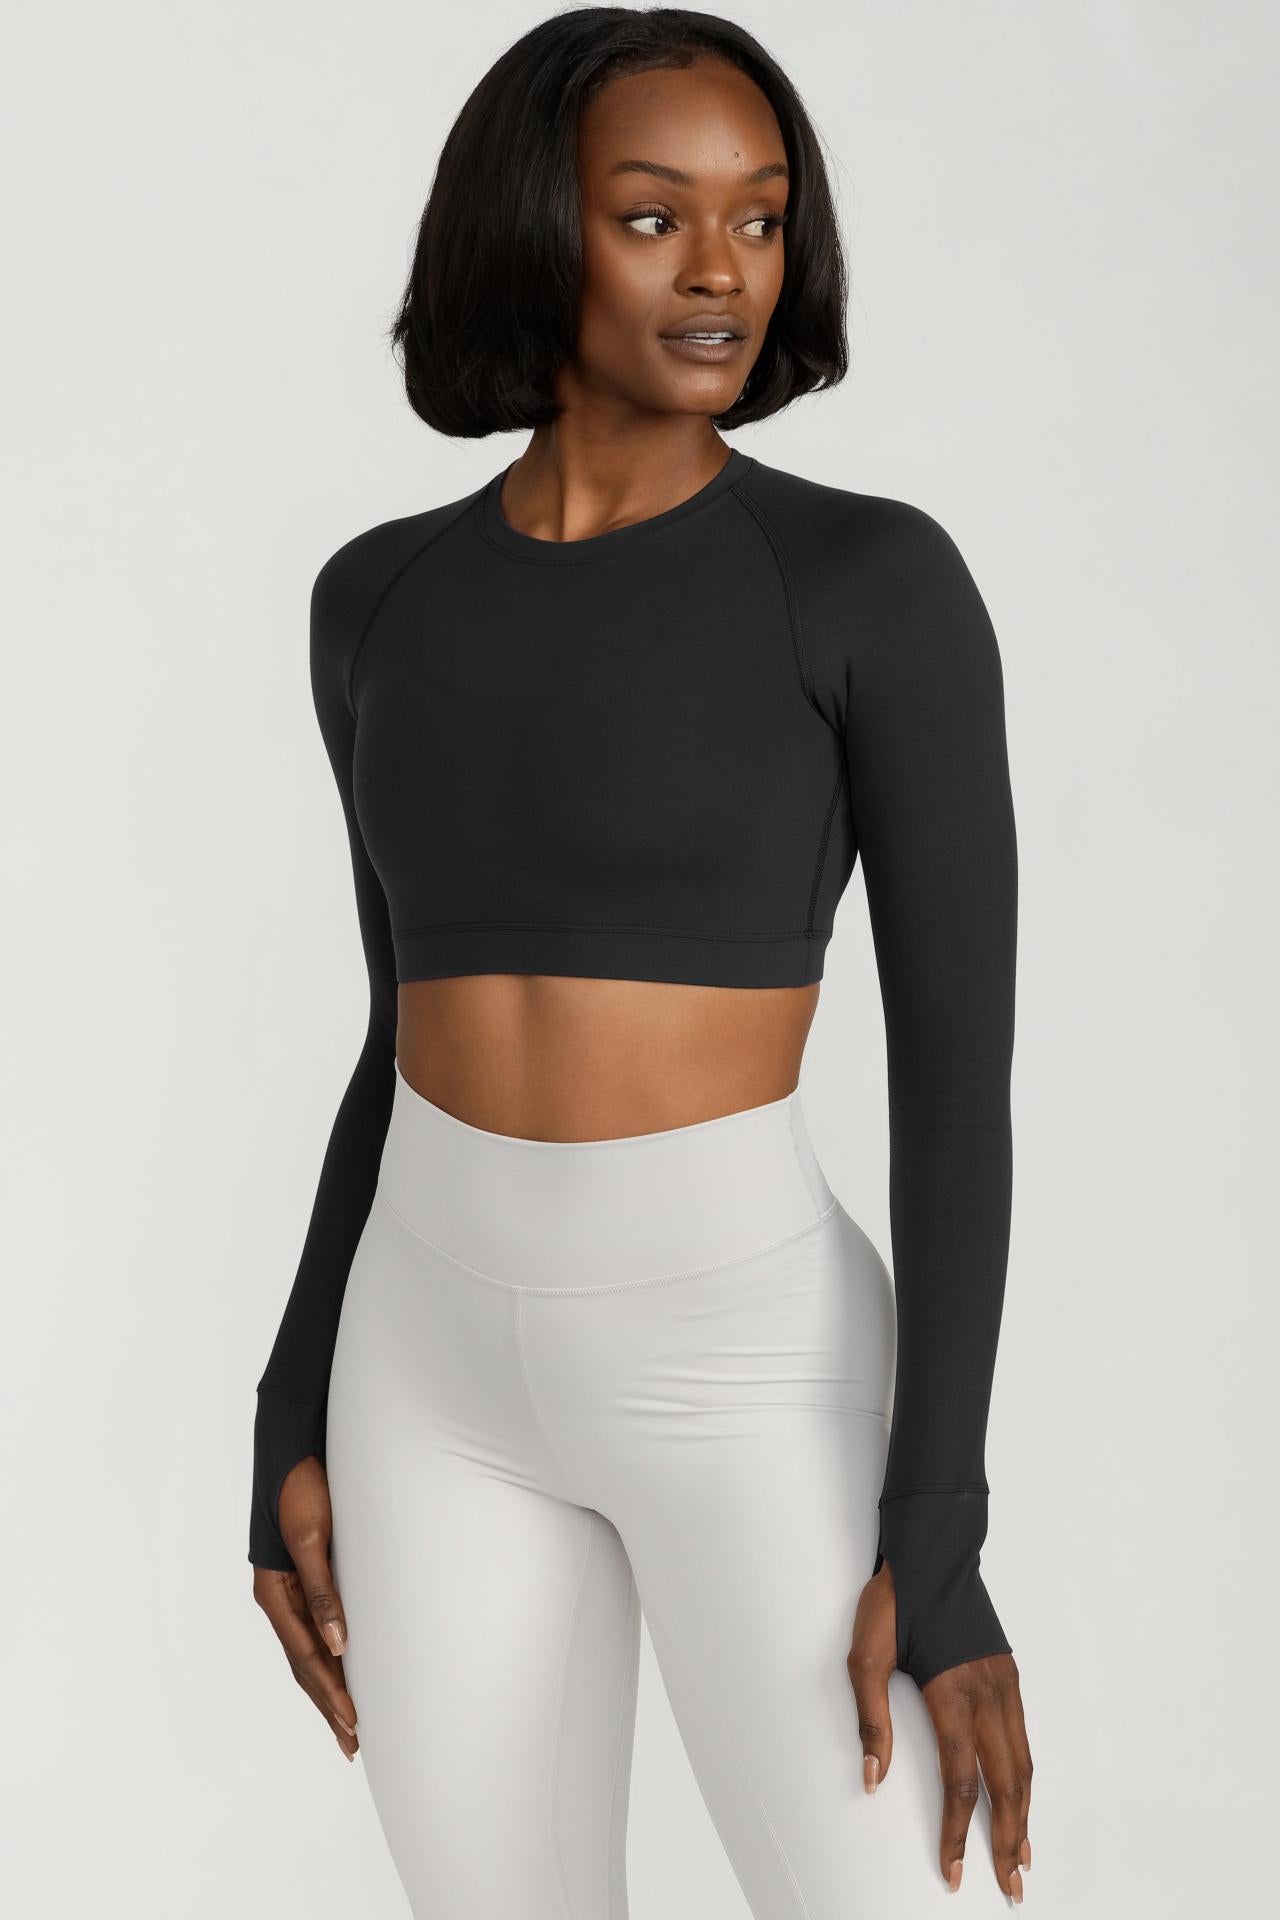 WOMEN'S NEW ARRIVALS – Southern Athletica